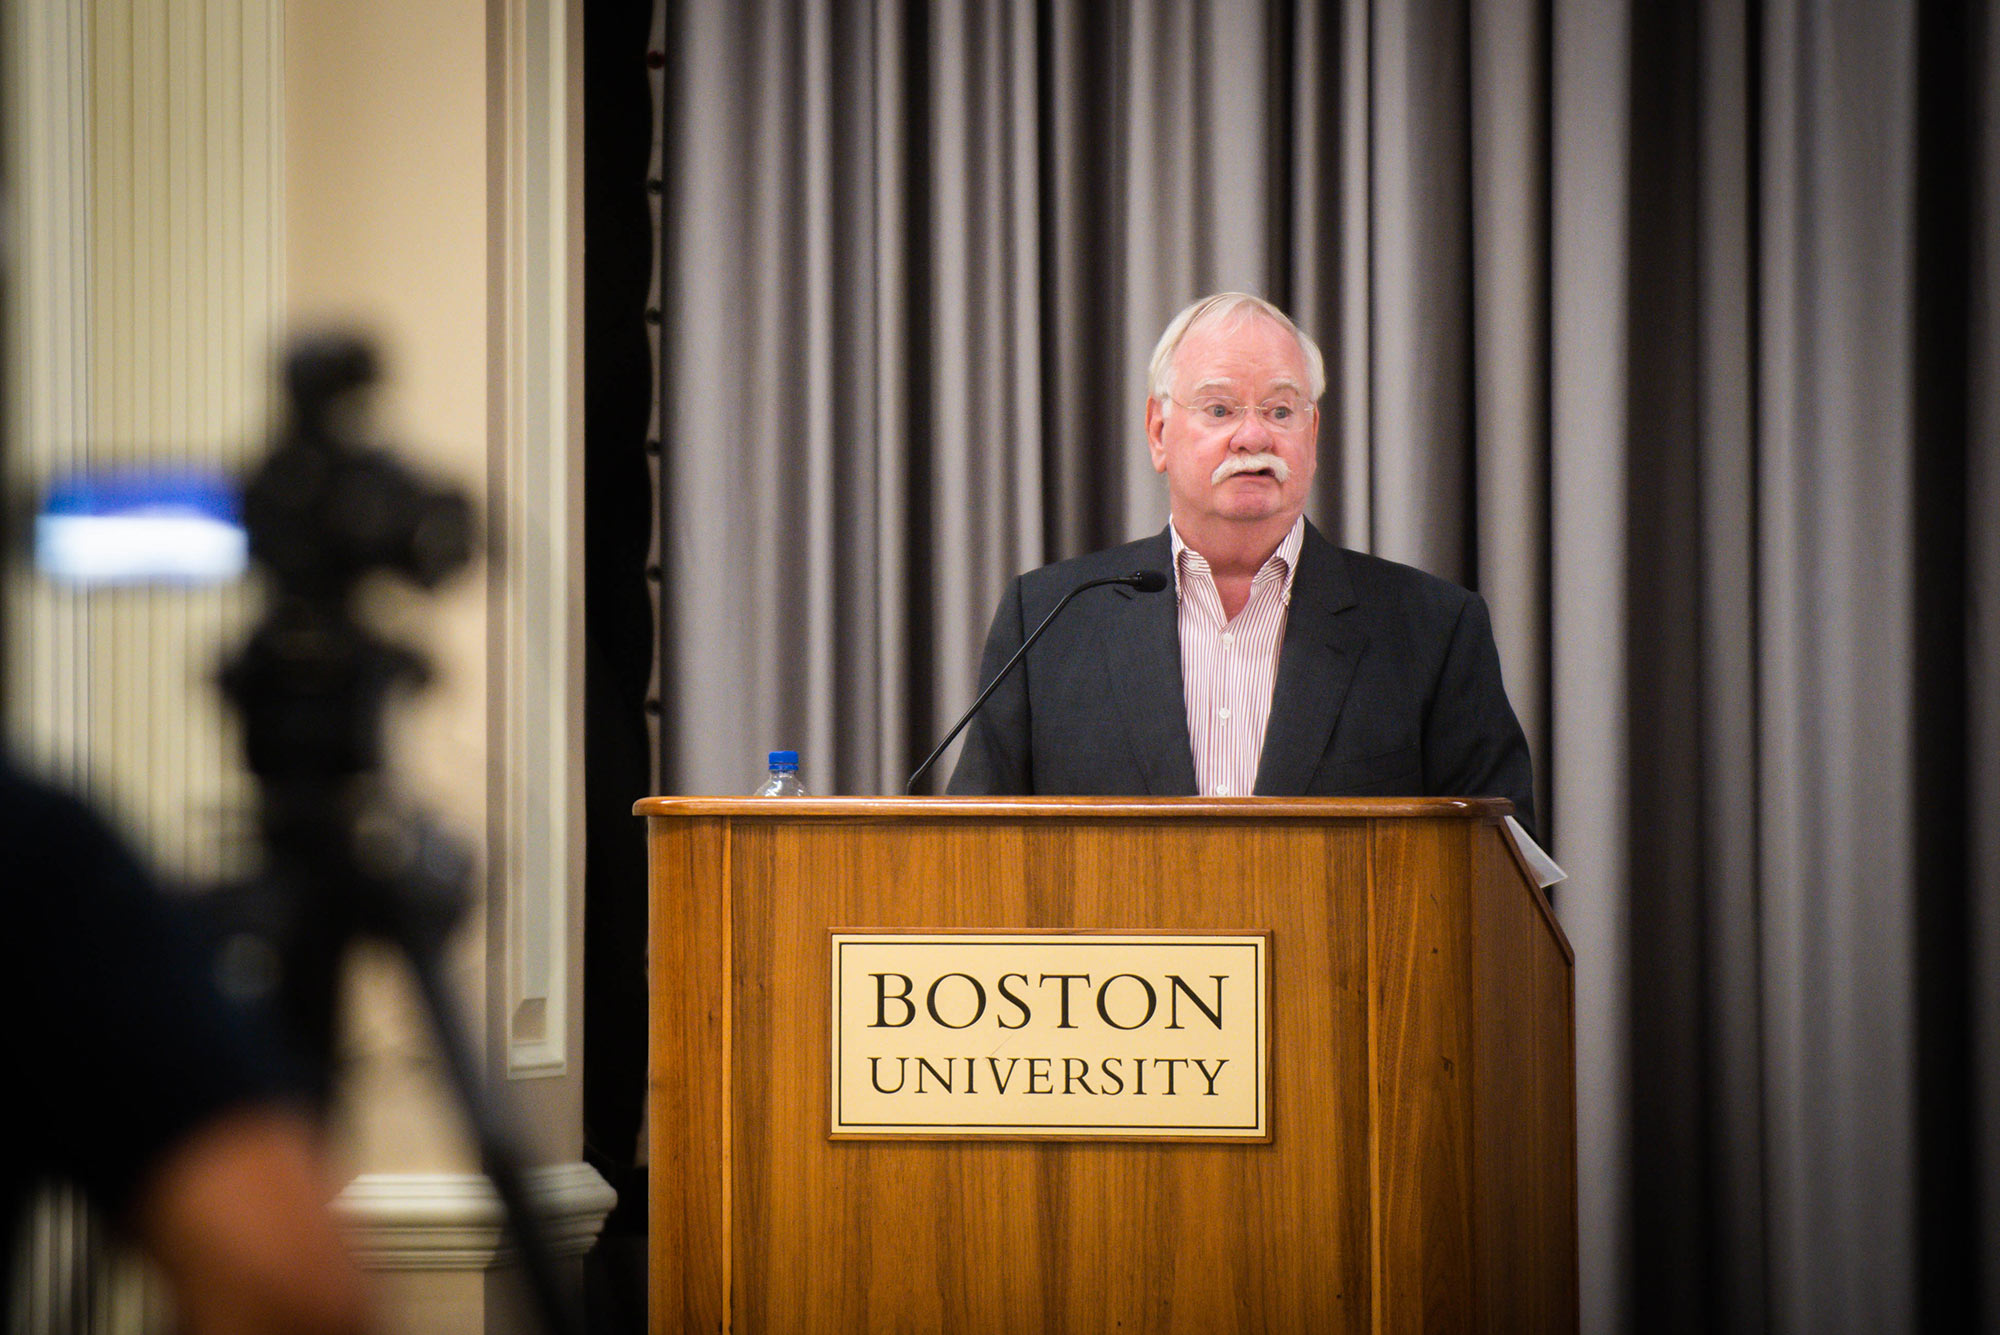 Photo of Dr. Robert Brown, in a suit, standing at a Boston University podium, discussing the fall semester and the beginning of remote work during a town hall meeting on August 19, 2021. A person filming the event is seen in silhouette in the left foreground.